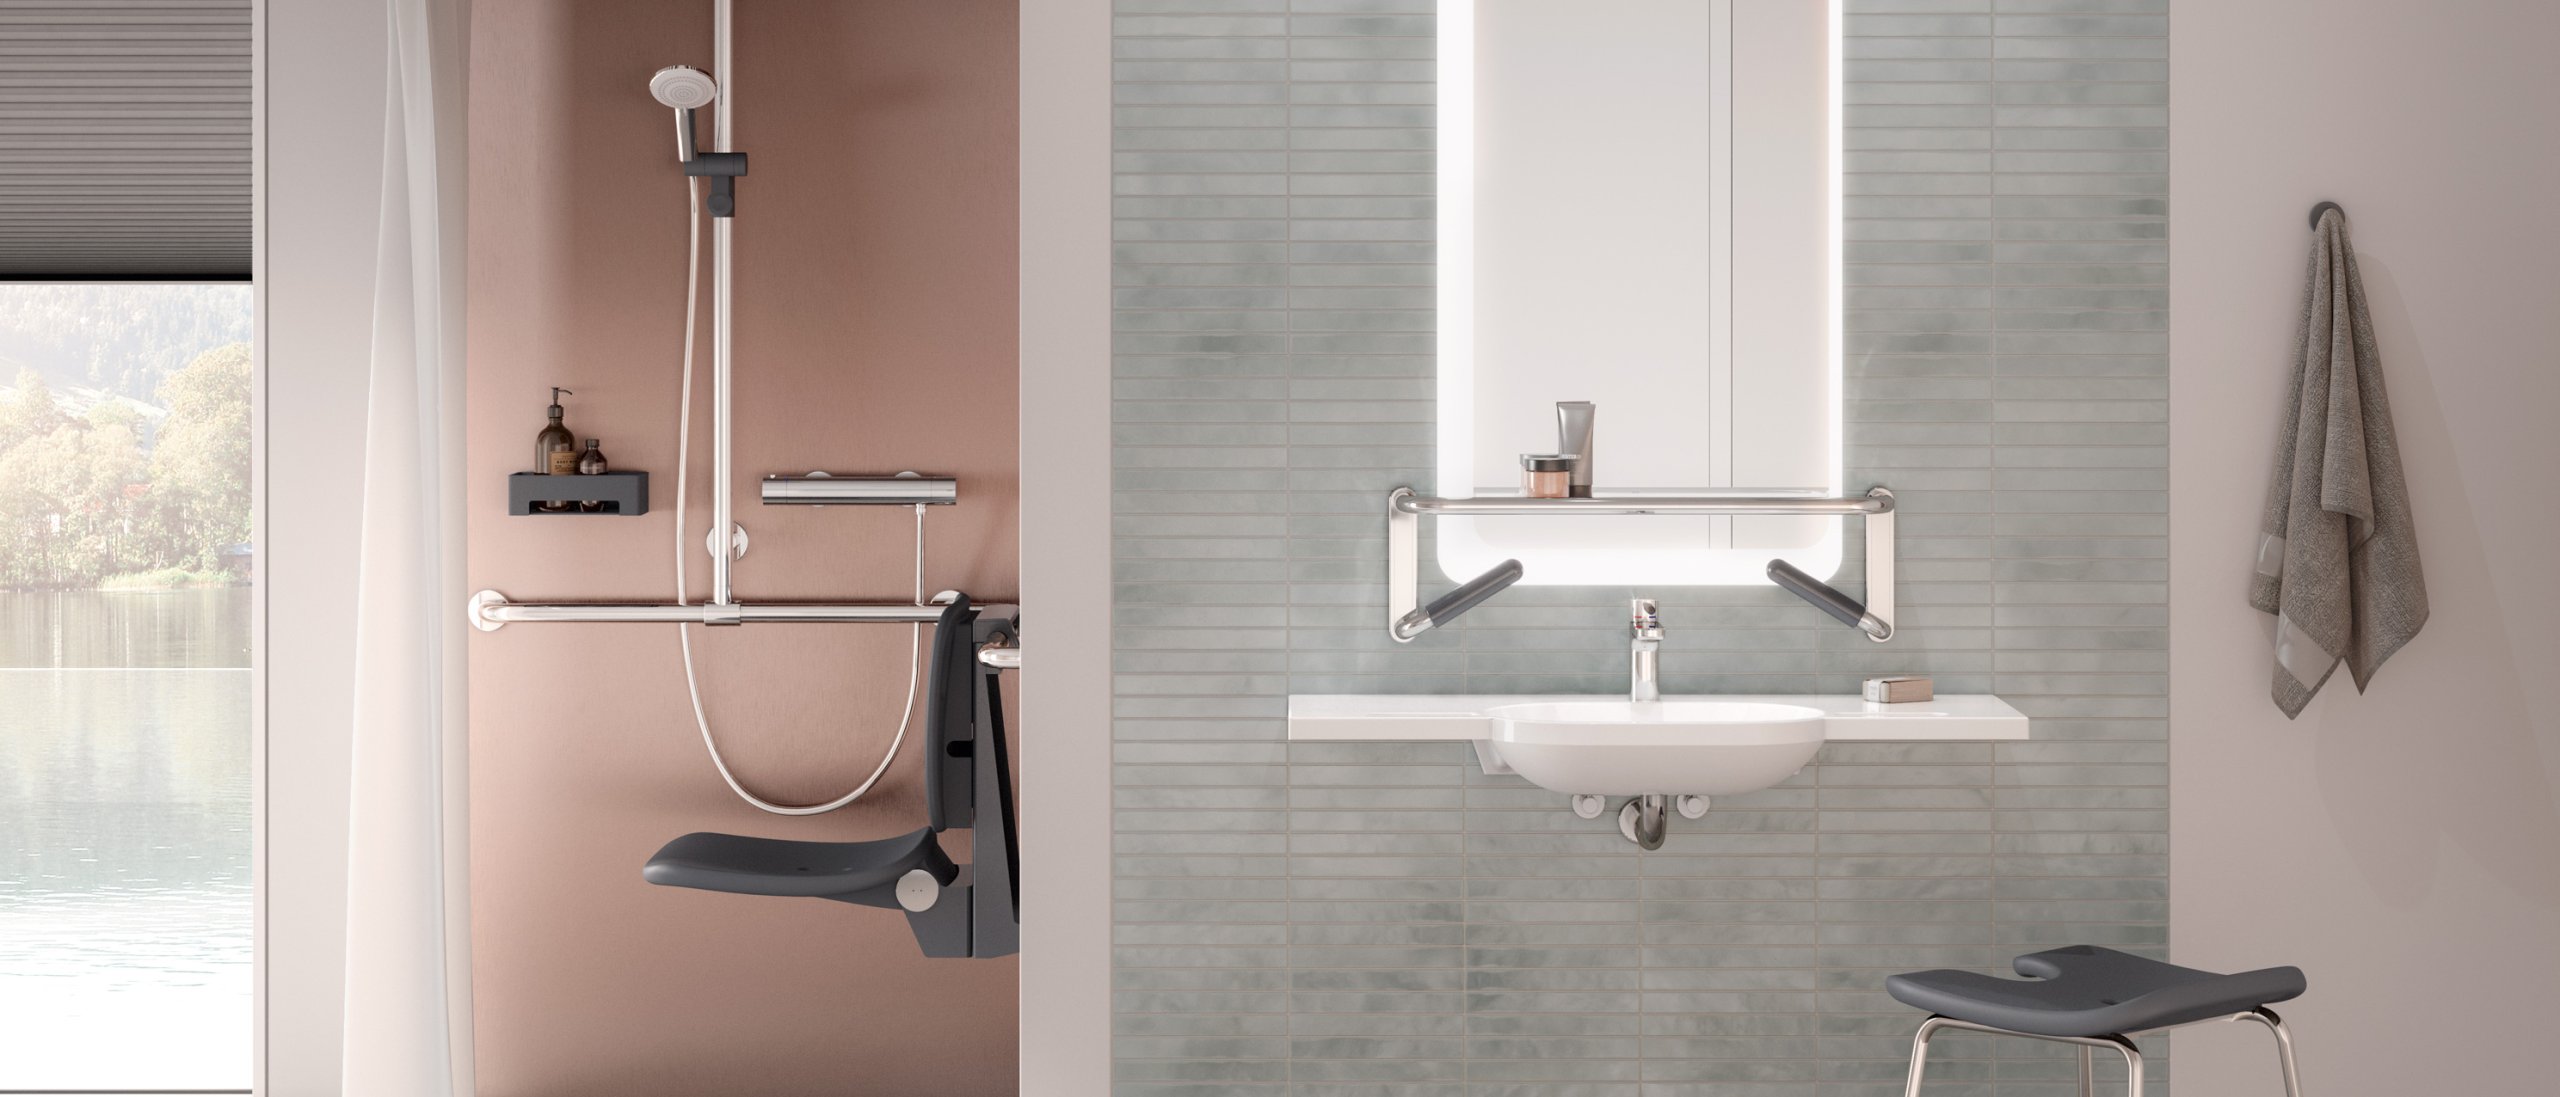 Barrier-free care bathroom with washbasin and shower area